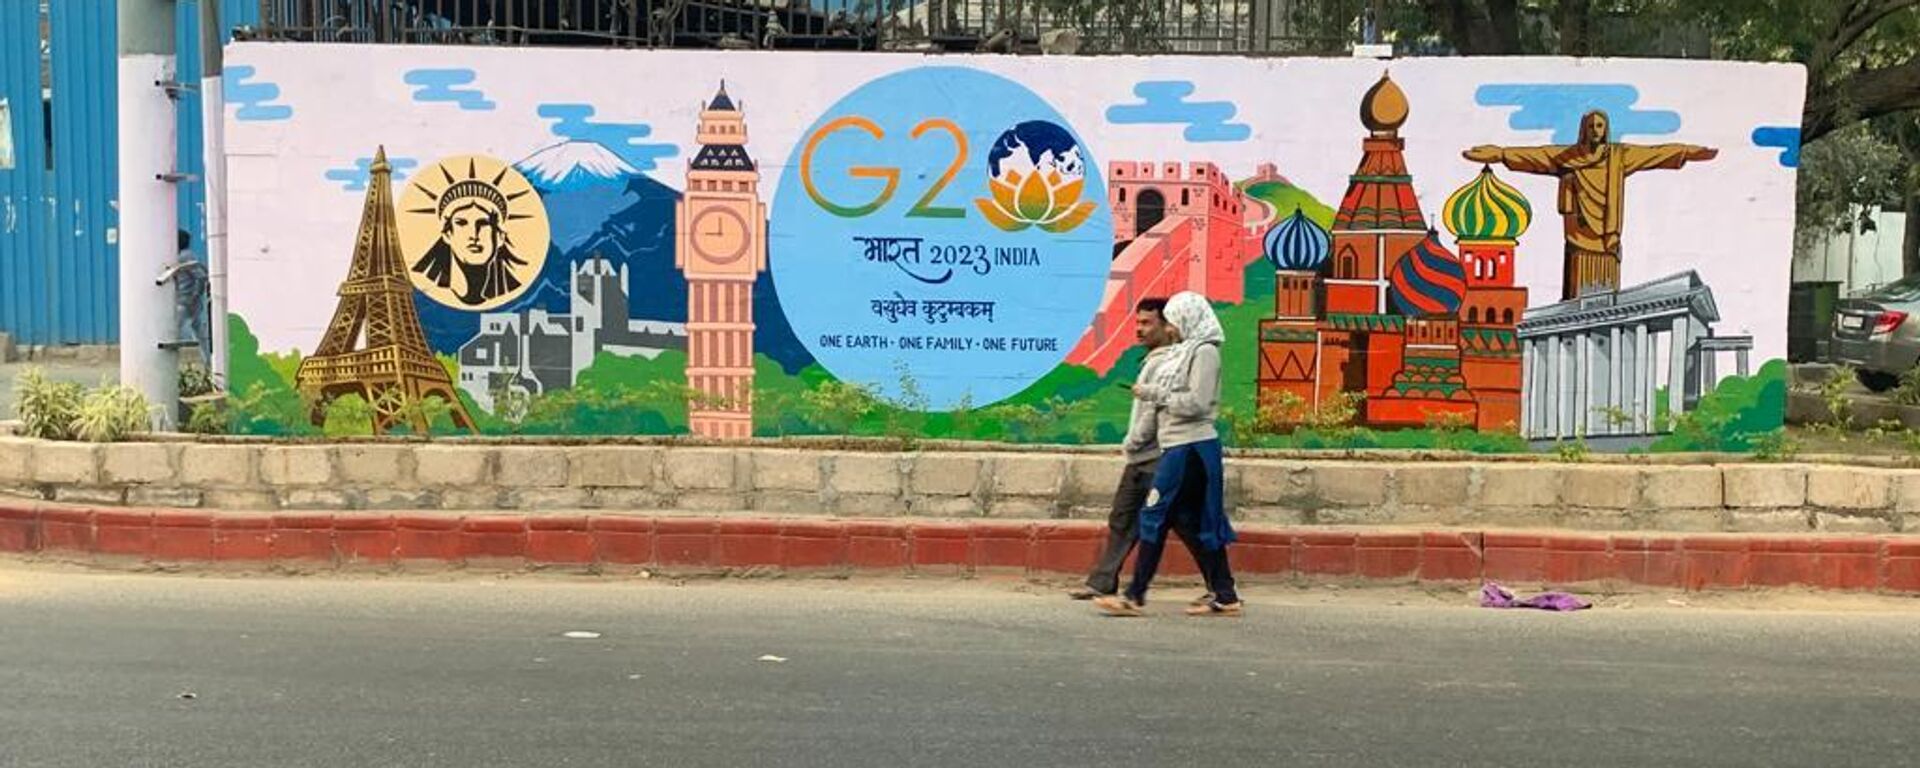 Delhi Street Art artists painted the town with creative murals on the walls of flyovers, pillars and buildings ahead of G20 Summit in New Delhi. - Sputnik India, 1920, 09.09.2023